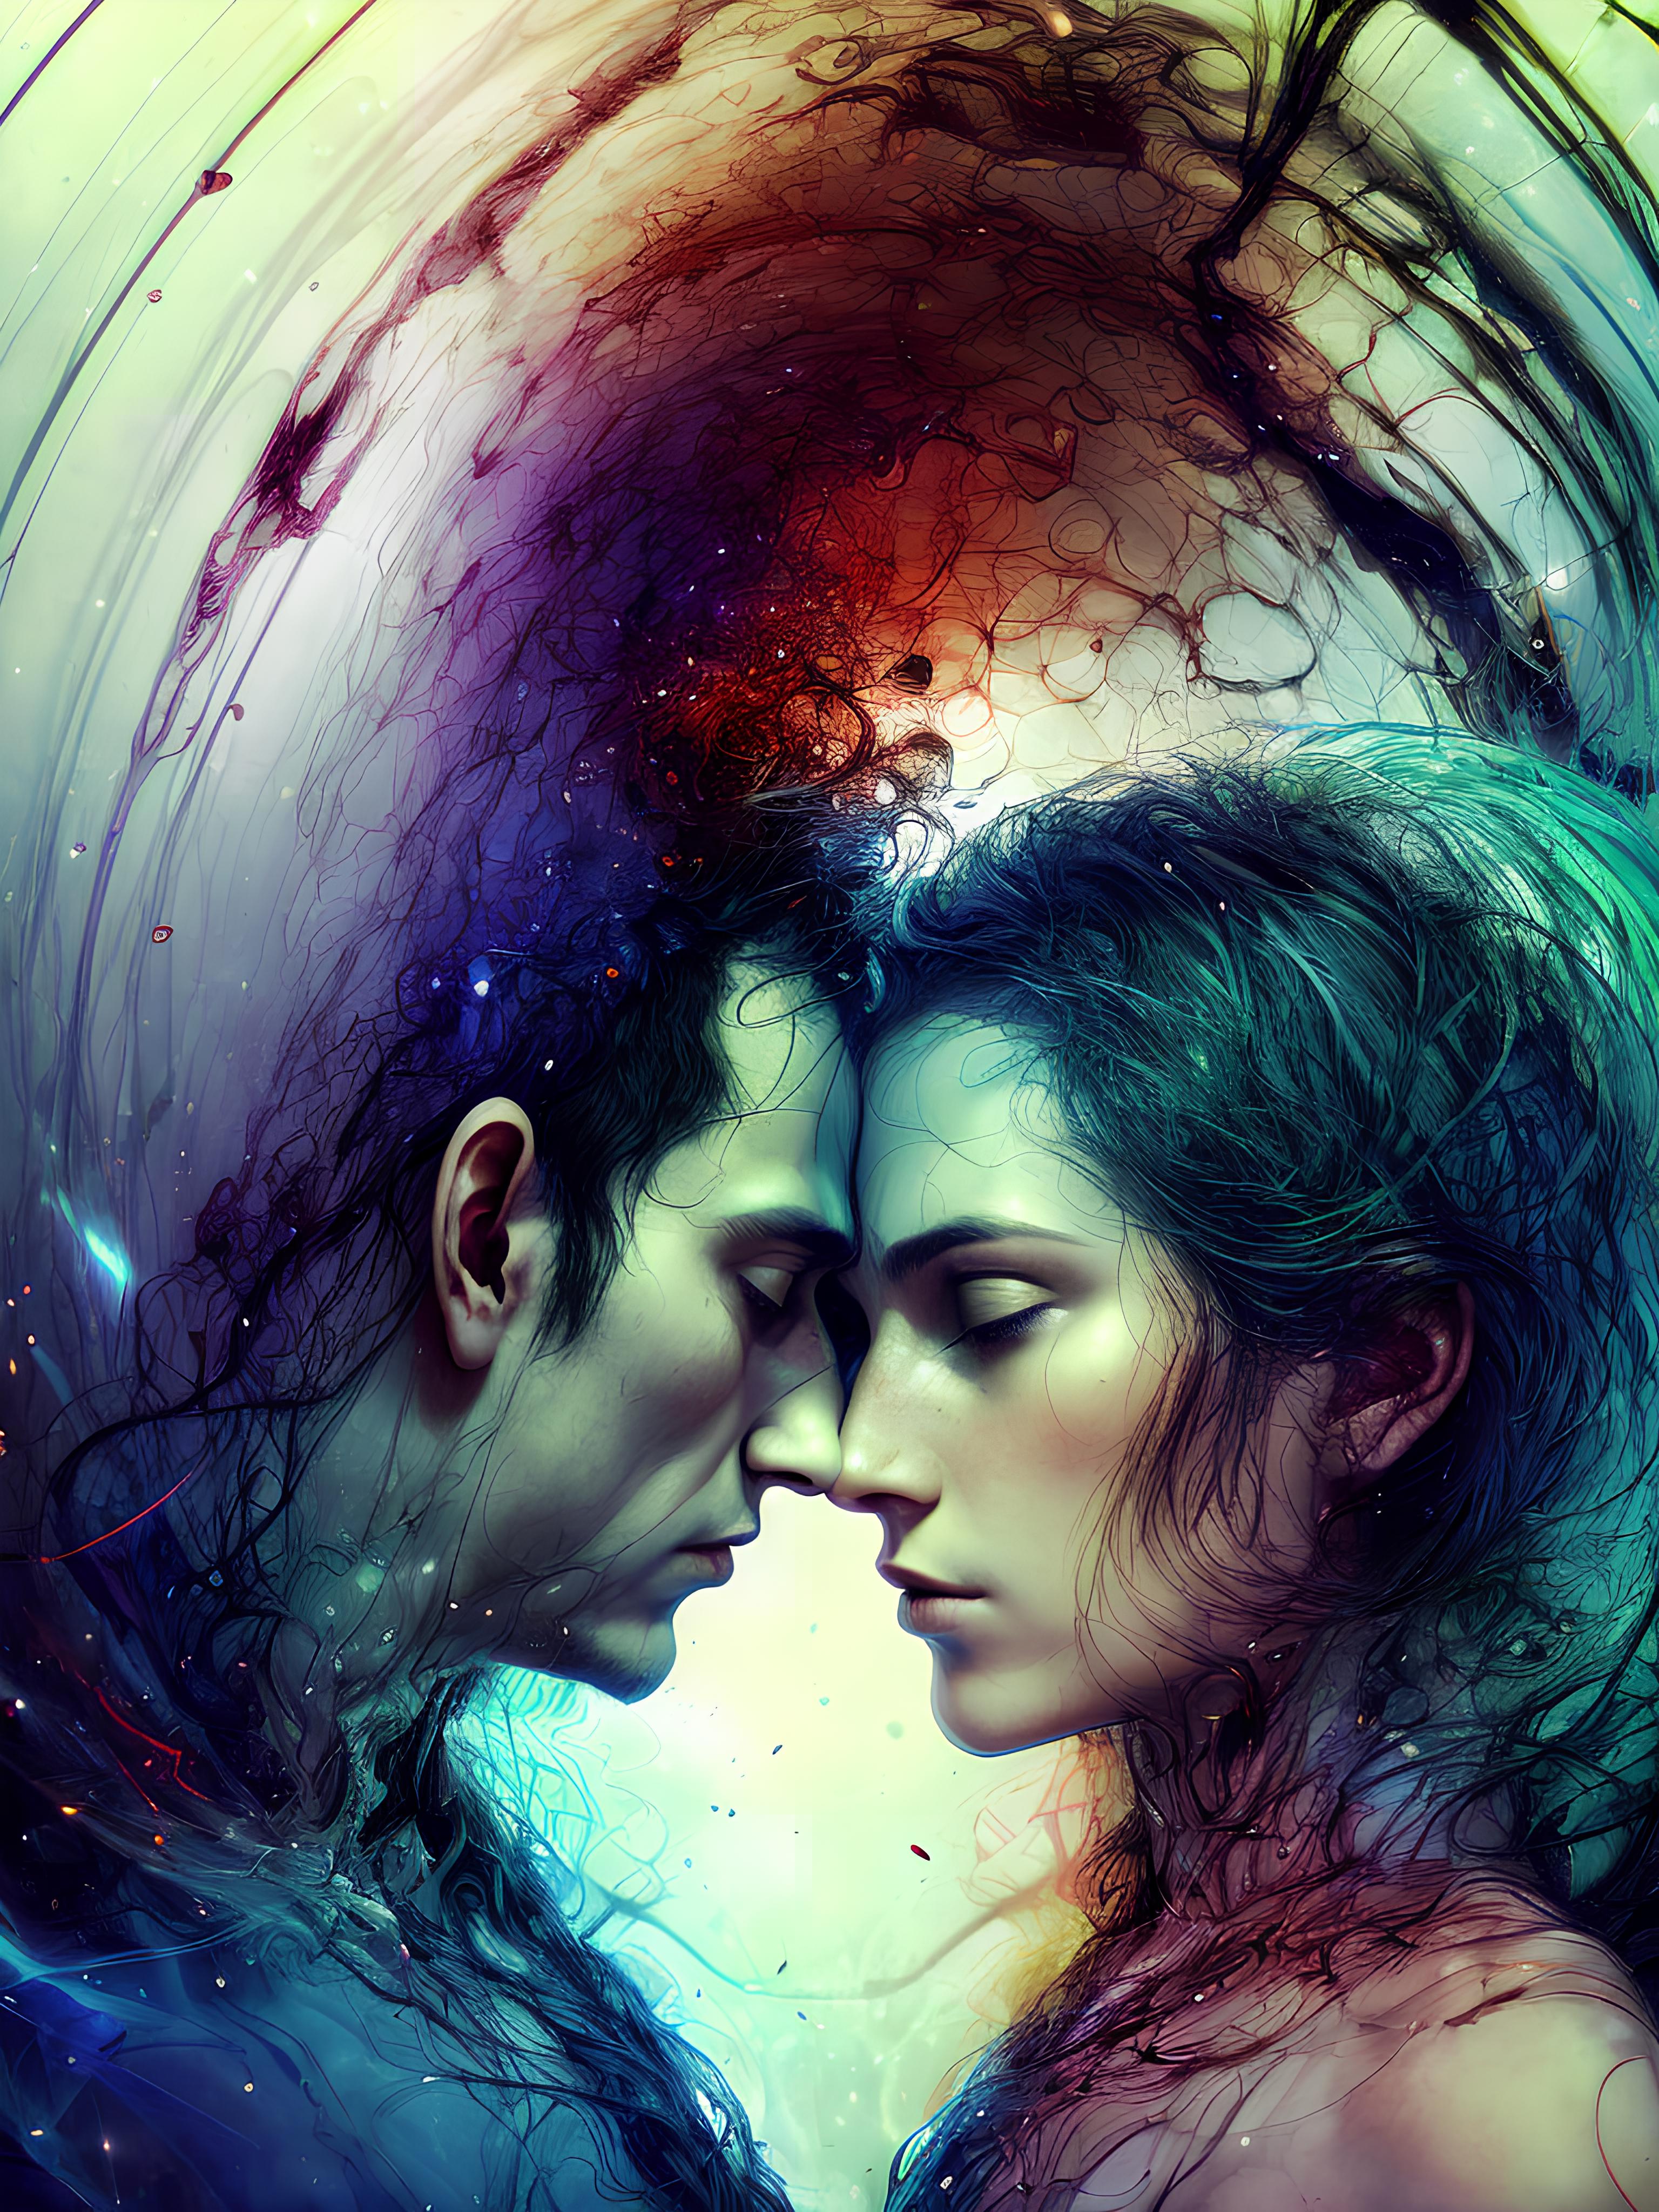 A digital illustration of a man and a woman standing together in front of a colorful background, with their heads touching.